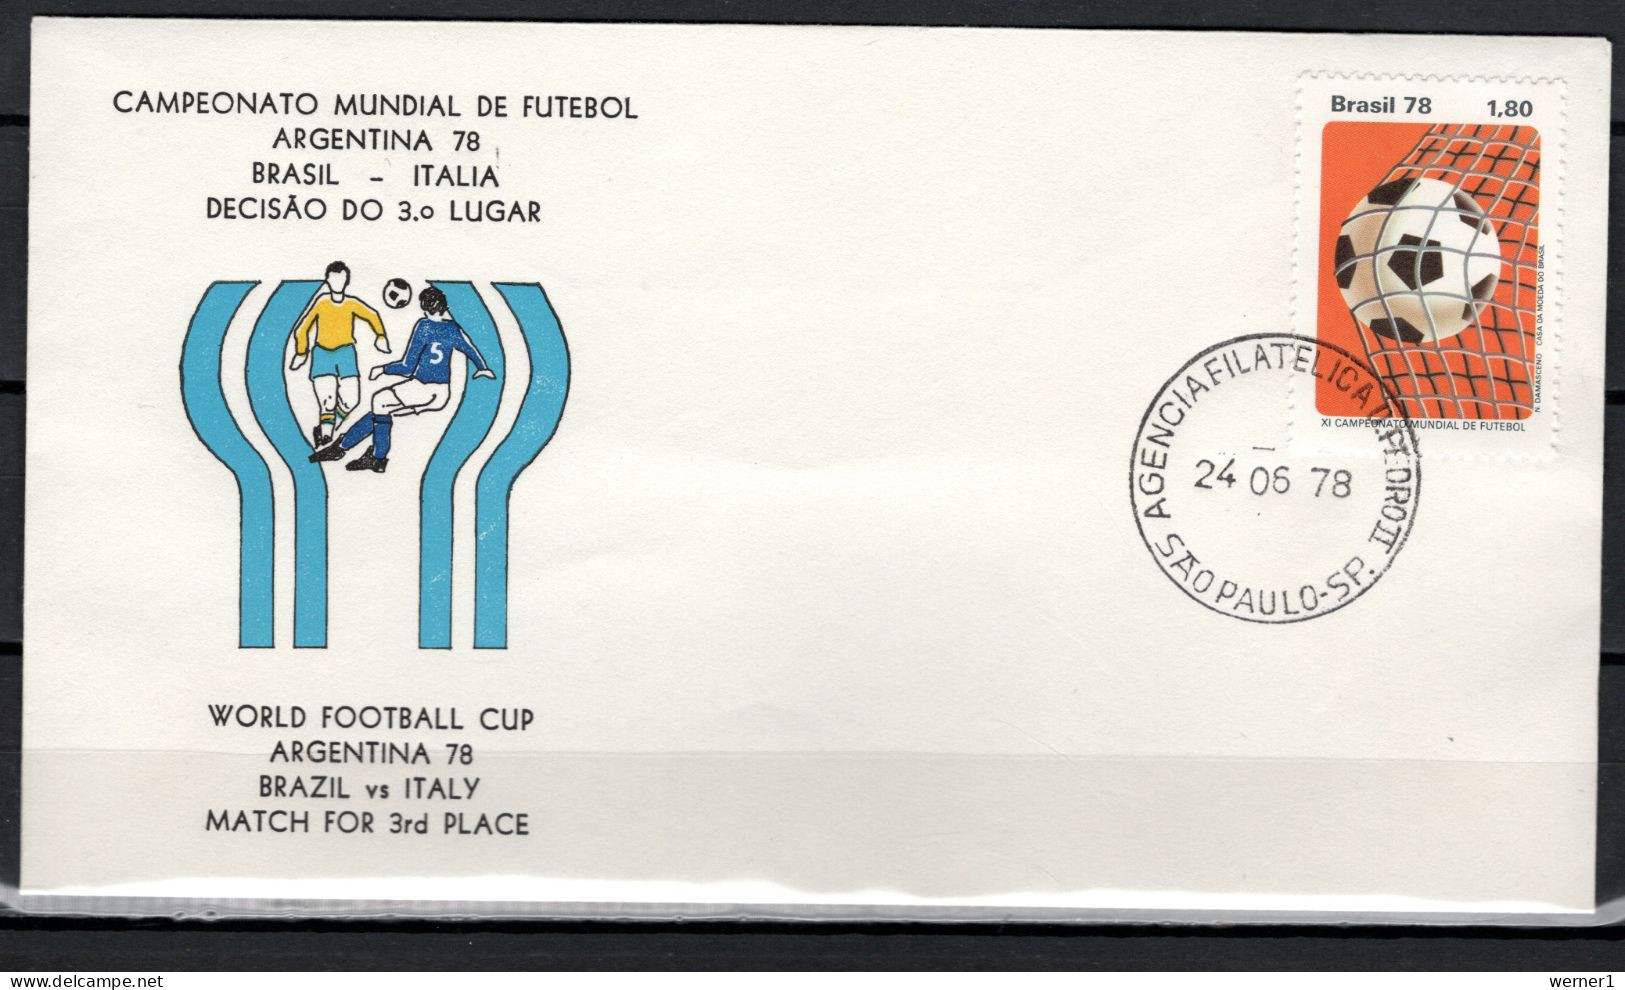 Brazil 1978 Football Soccer World Cup Commemorative Cover Match For 3rd Place Brazil - Italy - 1978 – Argentina